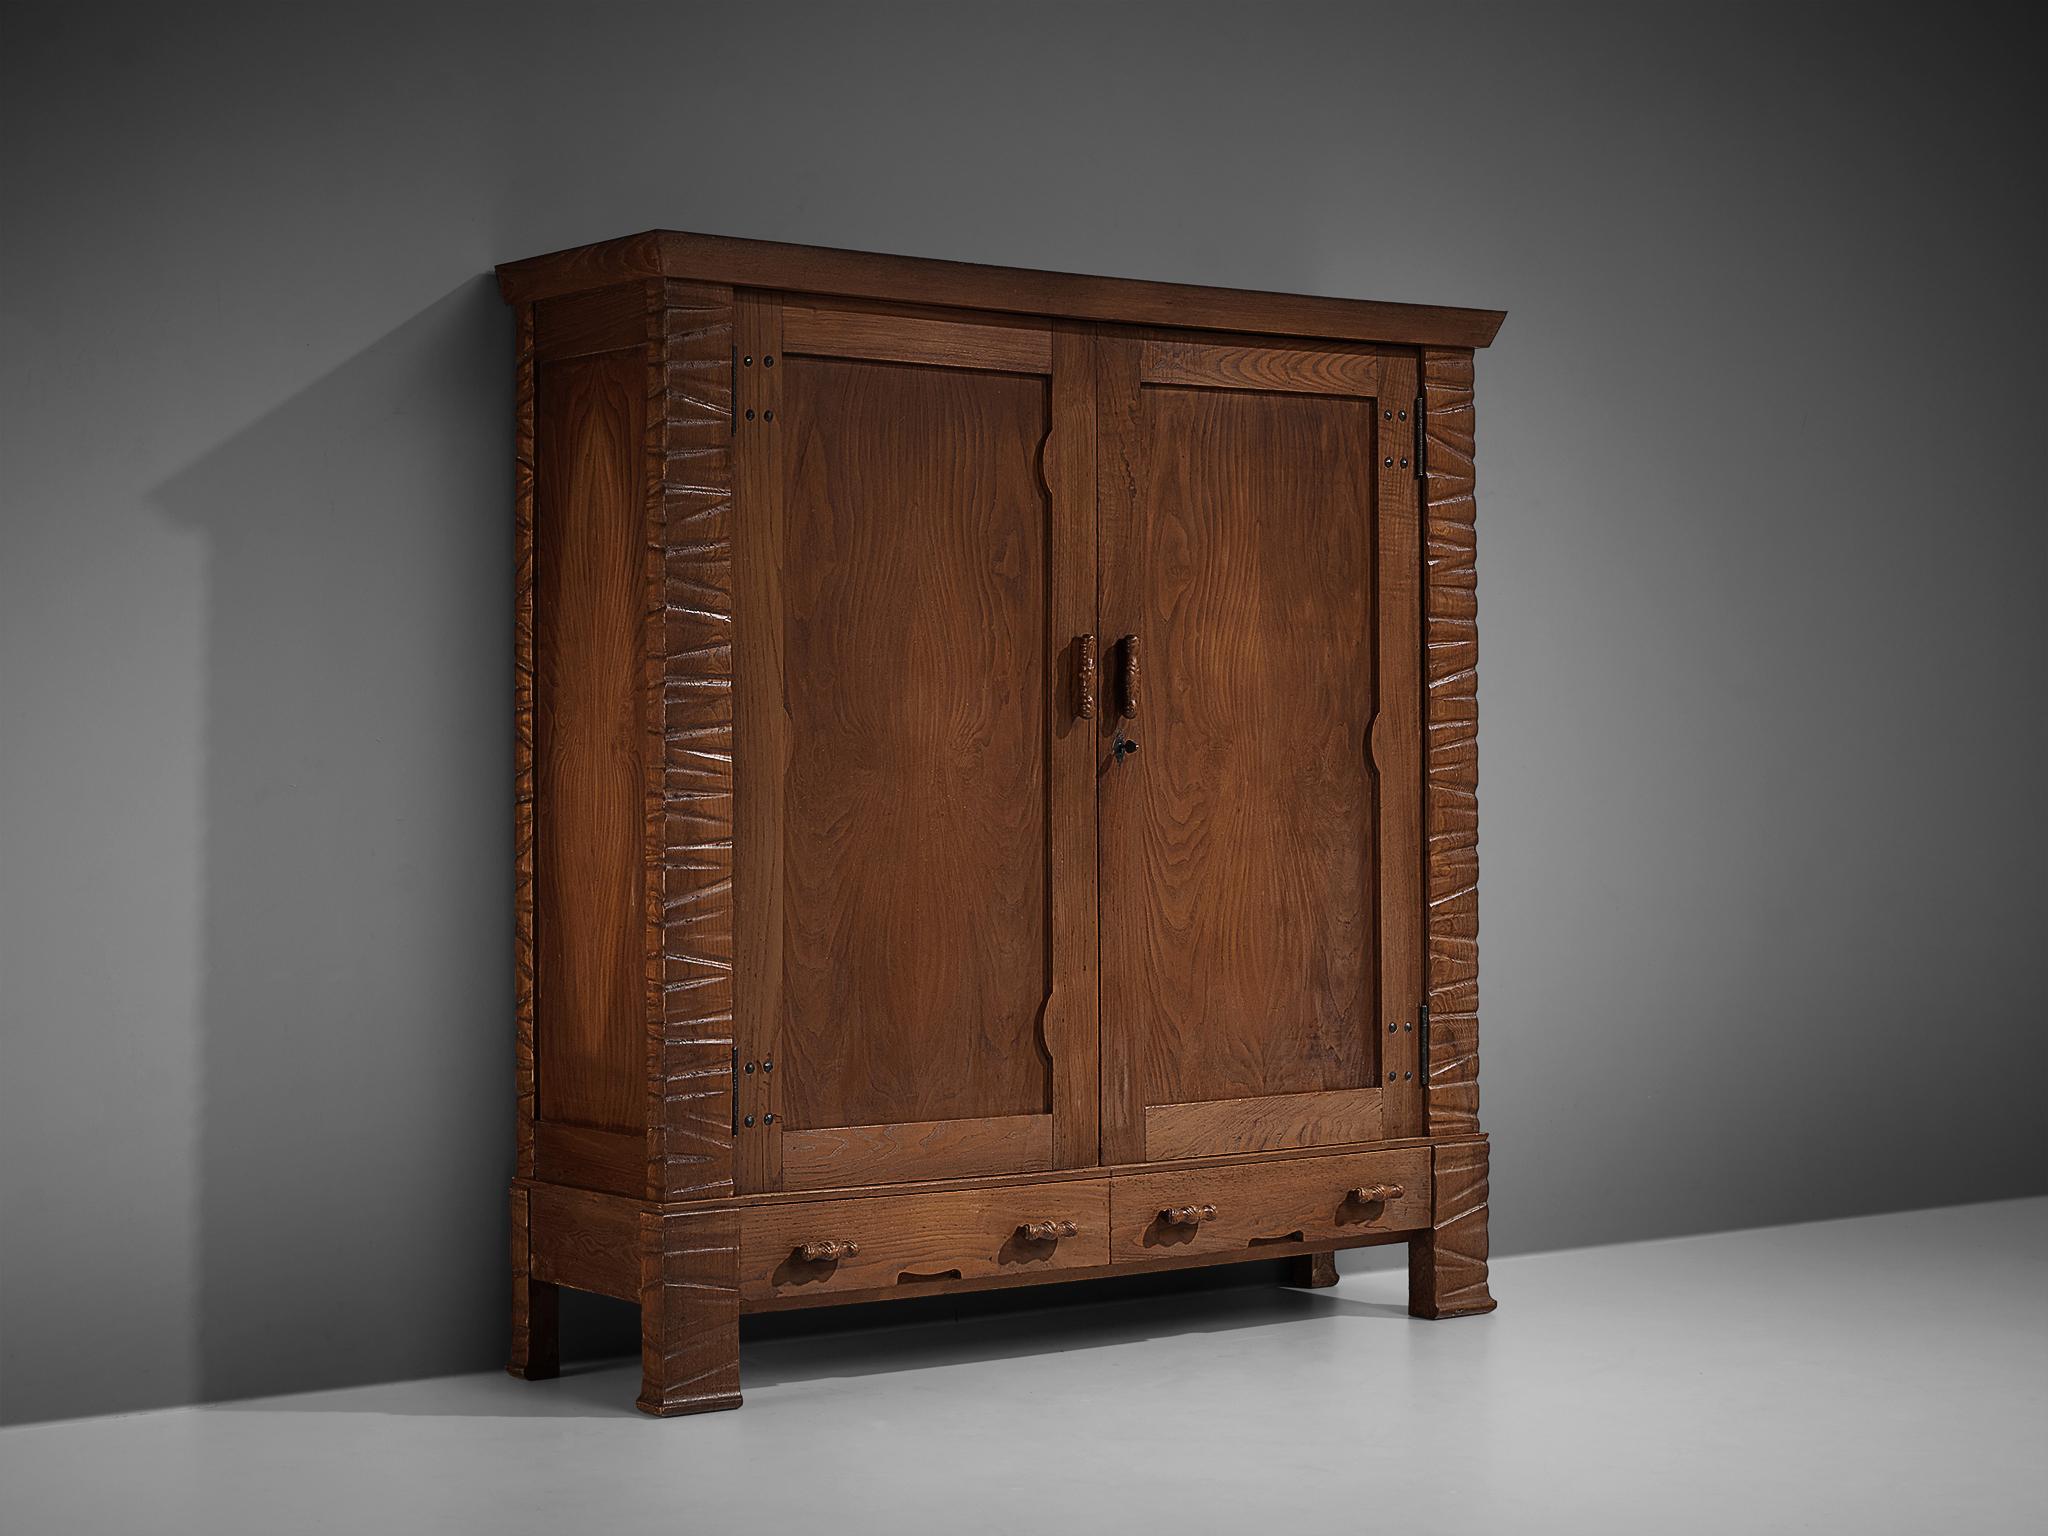 Ernesto Valabrega, wardrobe, chestnut, mirrored glass, Italy, ca. 1935

This expansive wardrobe beautifully exemplifies Ernesto Valabrega's distinctive design ethos. The design is marked by dynamic carved edges with decorative handles, creating an